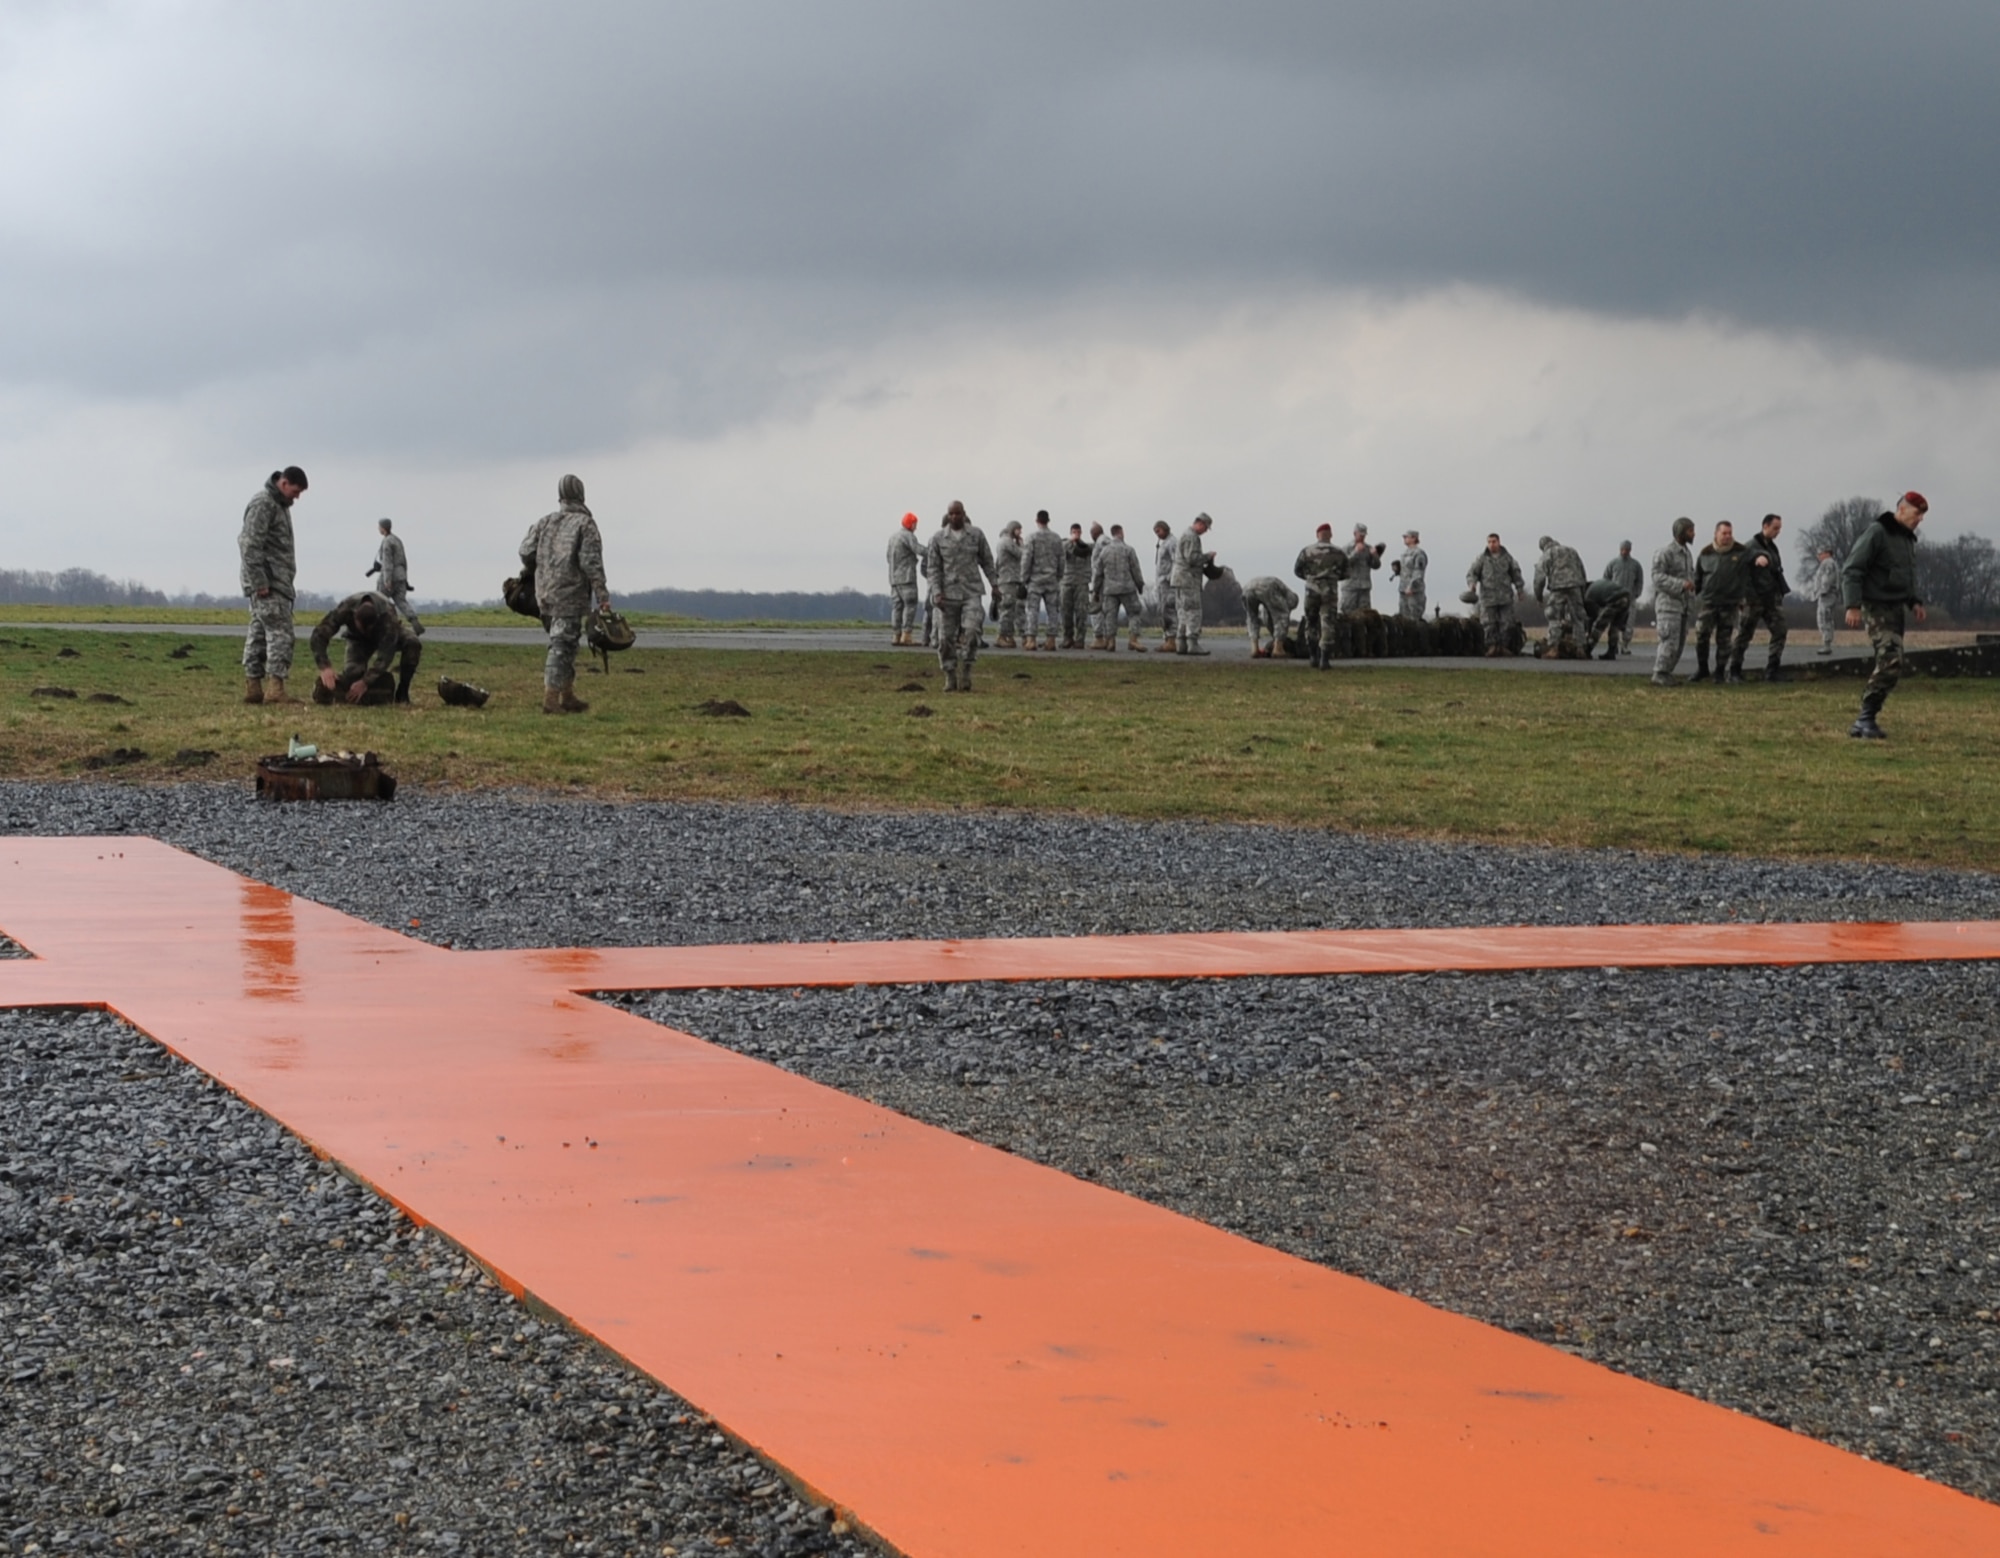 Airborne members meet on the drop zone after a static jump at École des troupes aéroportées (ETAP) Pau, France, March 4, 2010. Members of the 435th Contingency Response Group and the 5th Quartermaster Company joined with their French military counterparts for a week of training at the École des troupes aéroportées (ETAP), or School of Airborne Troops, a military school dedicated to training the military paratroopers  the French army, located in the town of Pau, in the département of Pyrénées-Atlantiques, France.  The ETAP is responsible for training paratroopers, and for international cooperation and promotion of paratroop culture. (U.S. Air Force photo by Airman 1st Class Caleb Pierce)